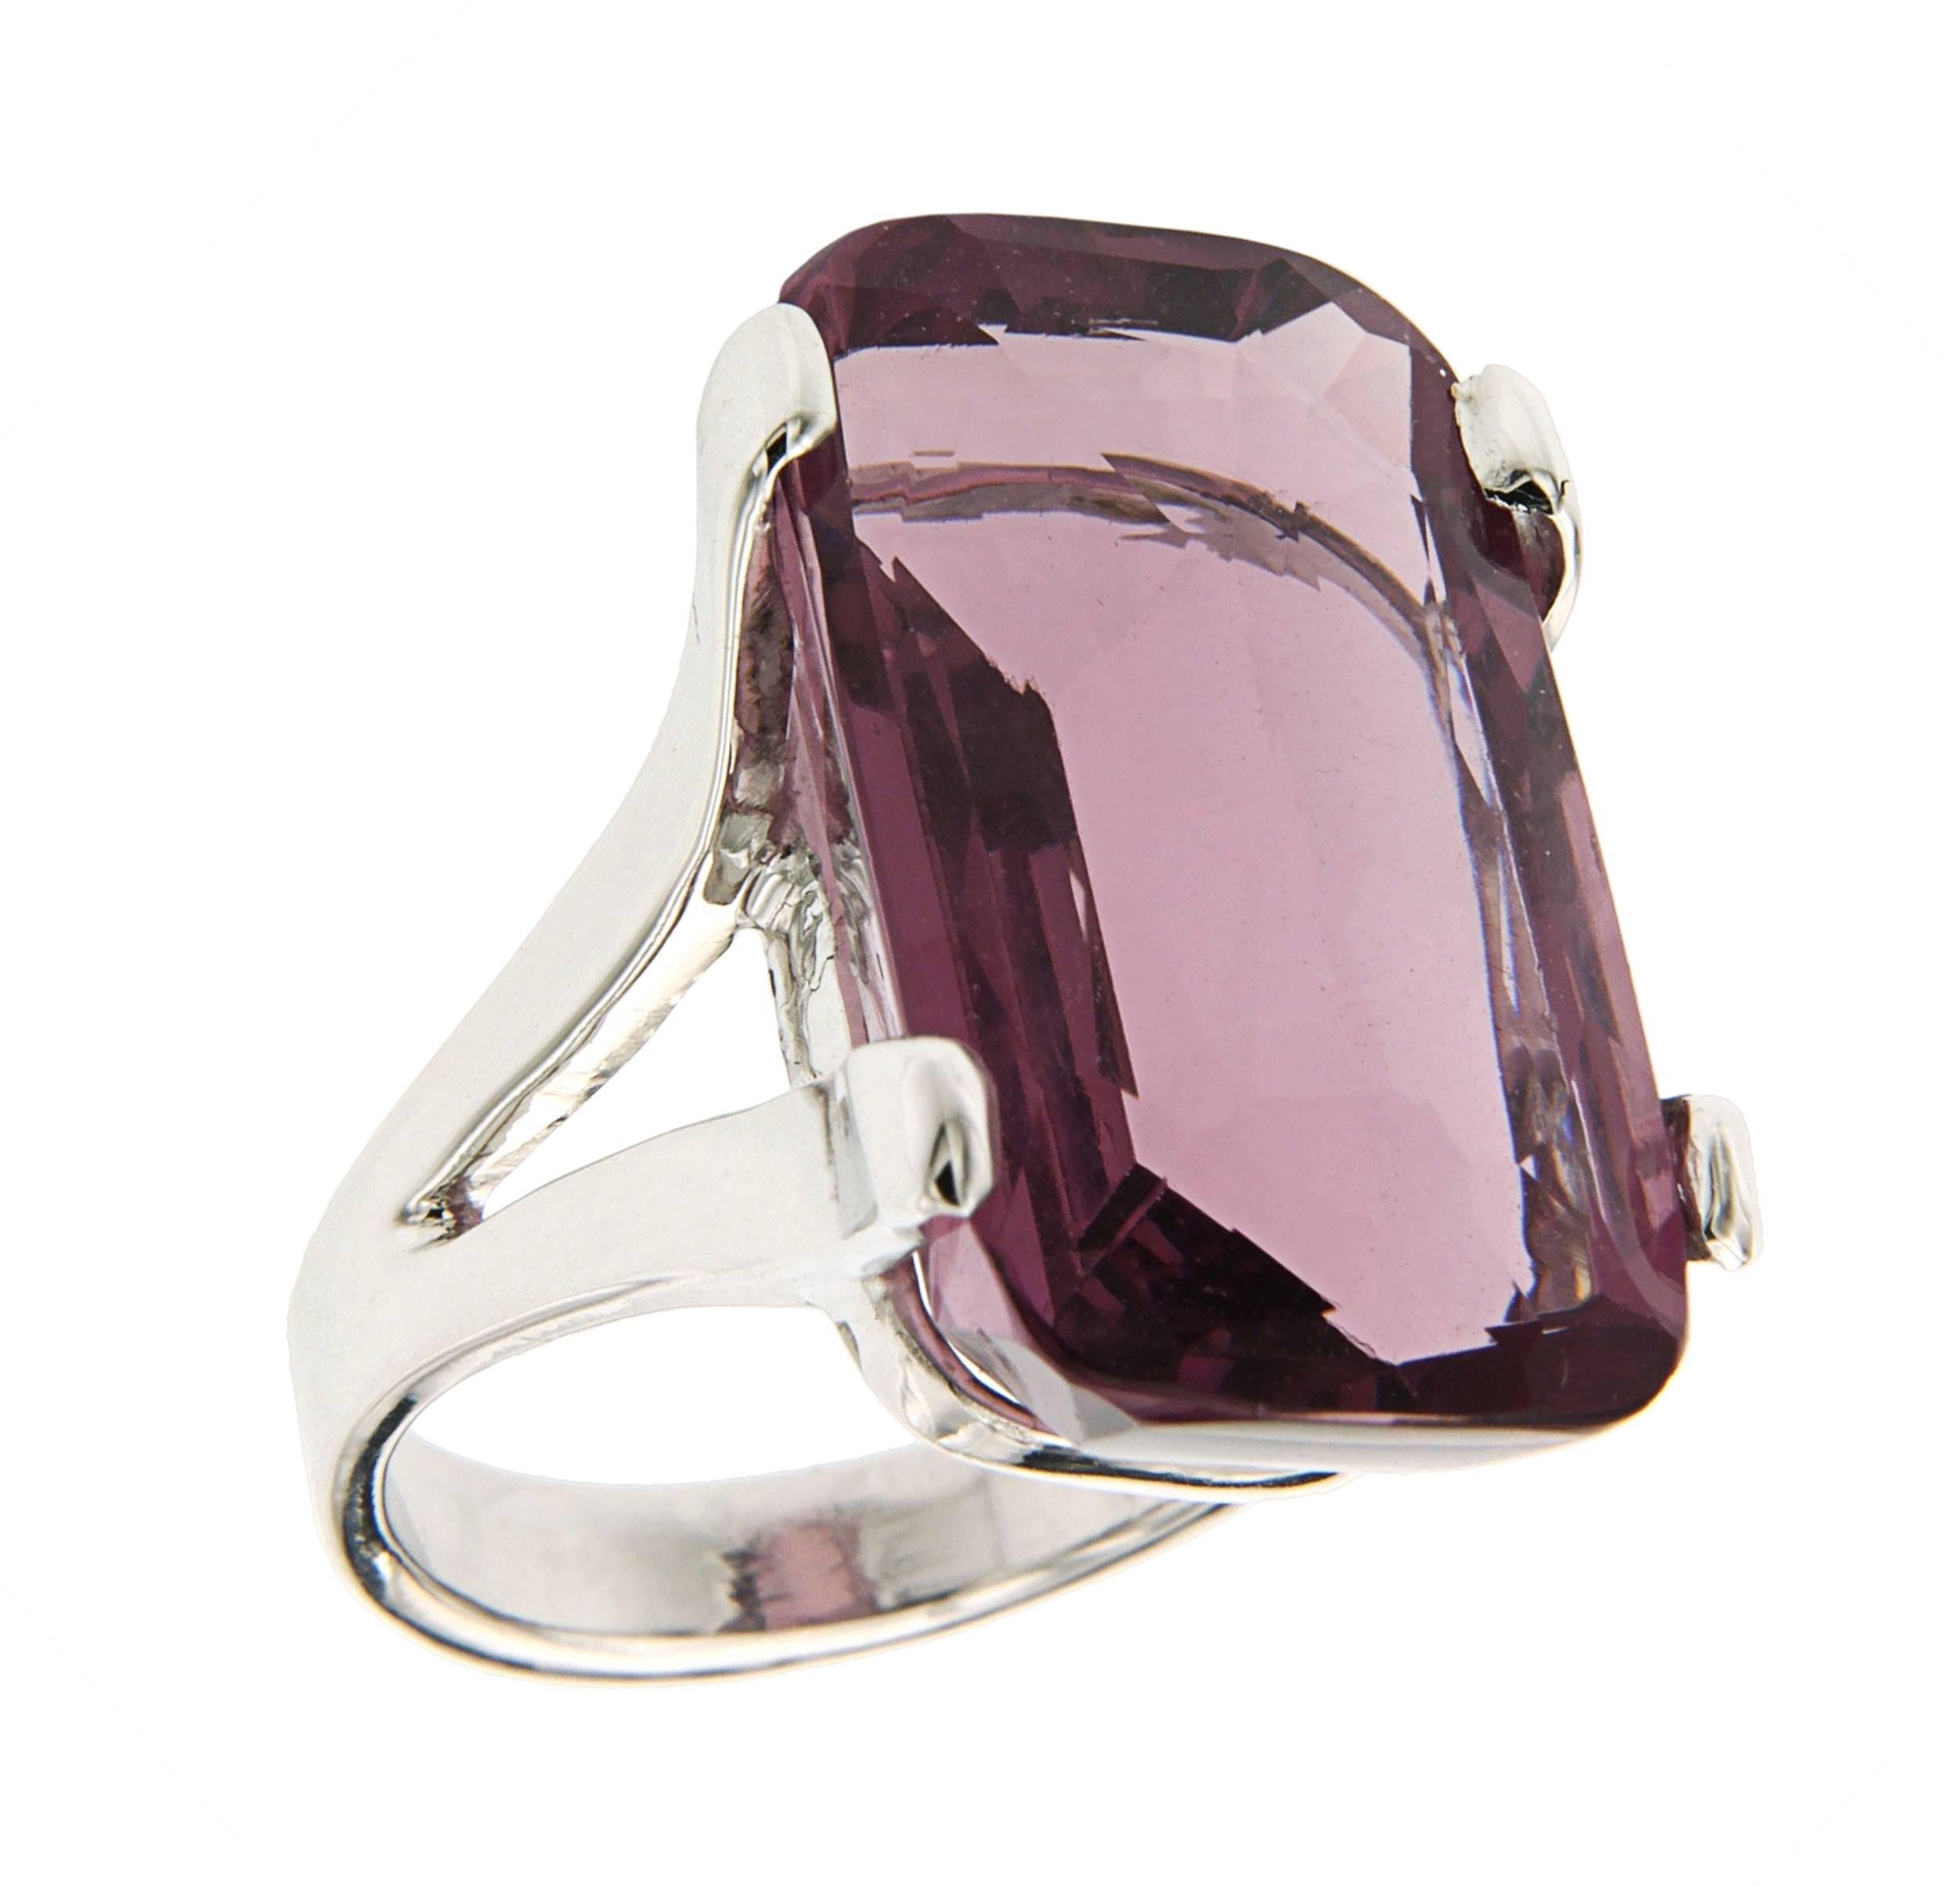 Modern Cocktail Ring, White 18k Gold with Amethyst 34.30 ctw 26x15 mm
Finger size 7, can be sized
